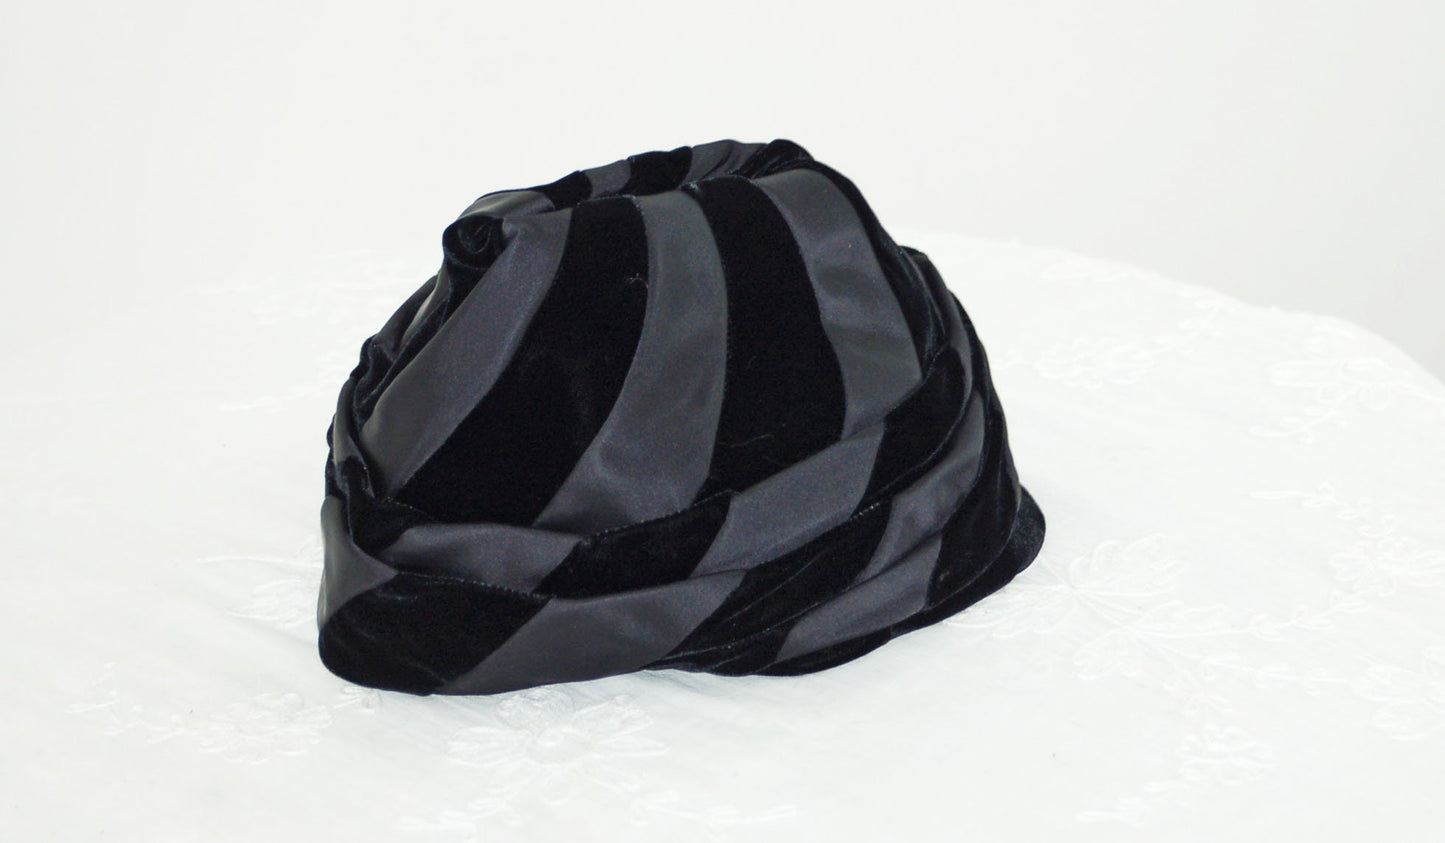 1960s hat turban style peaked hat black striped velvet satin Size 21  by Amy New York